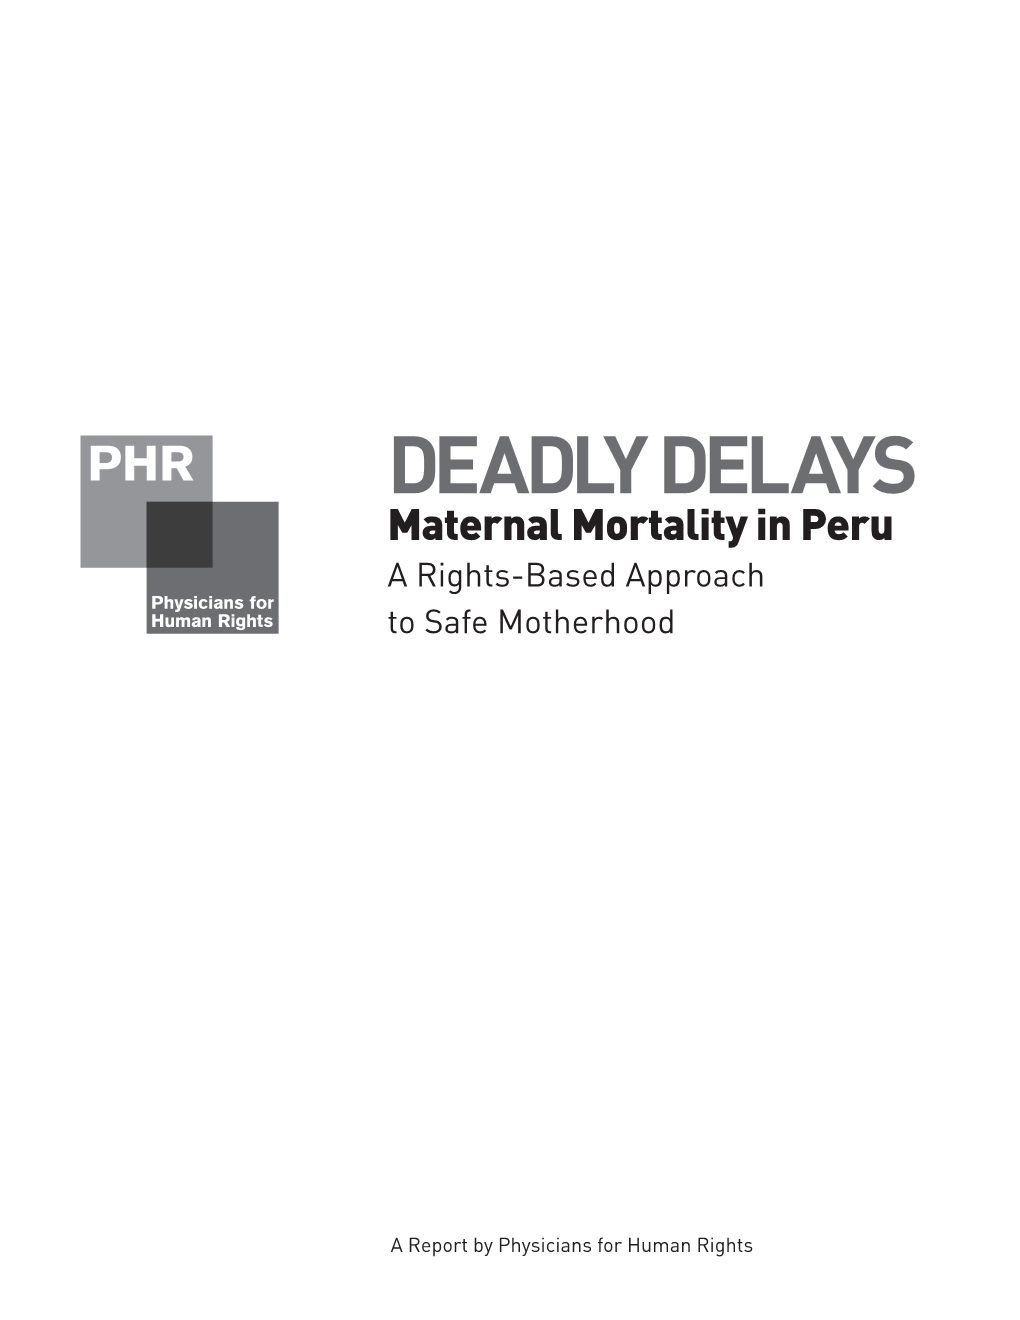 DEADLY DELAYS Maternal Mortality in Peru a Rights-Based Approach to Safe Motherhood